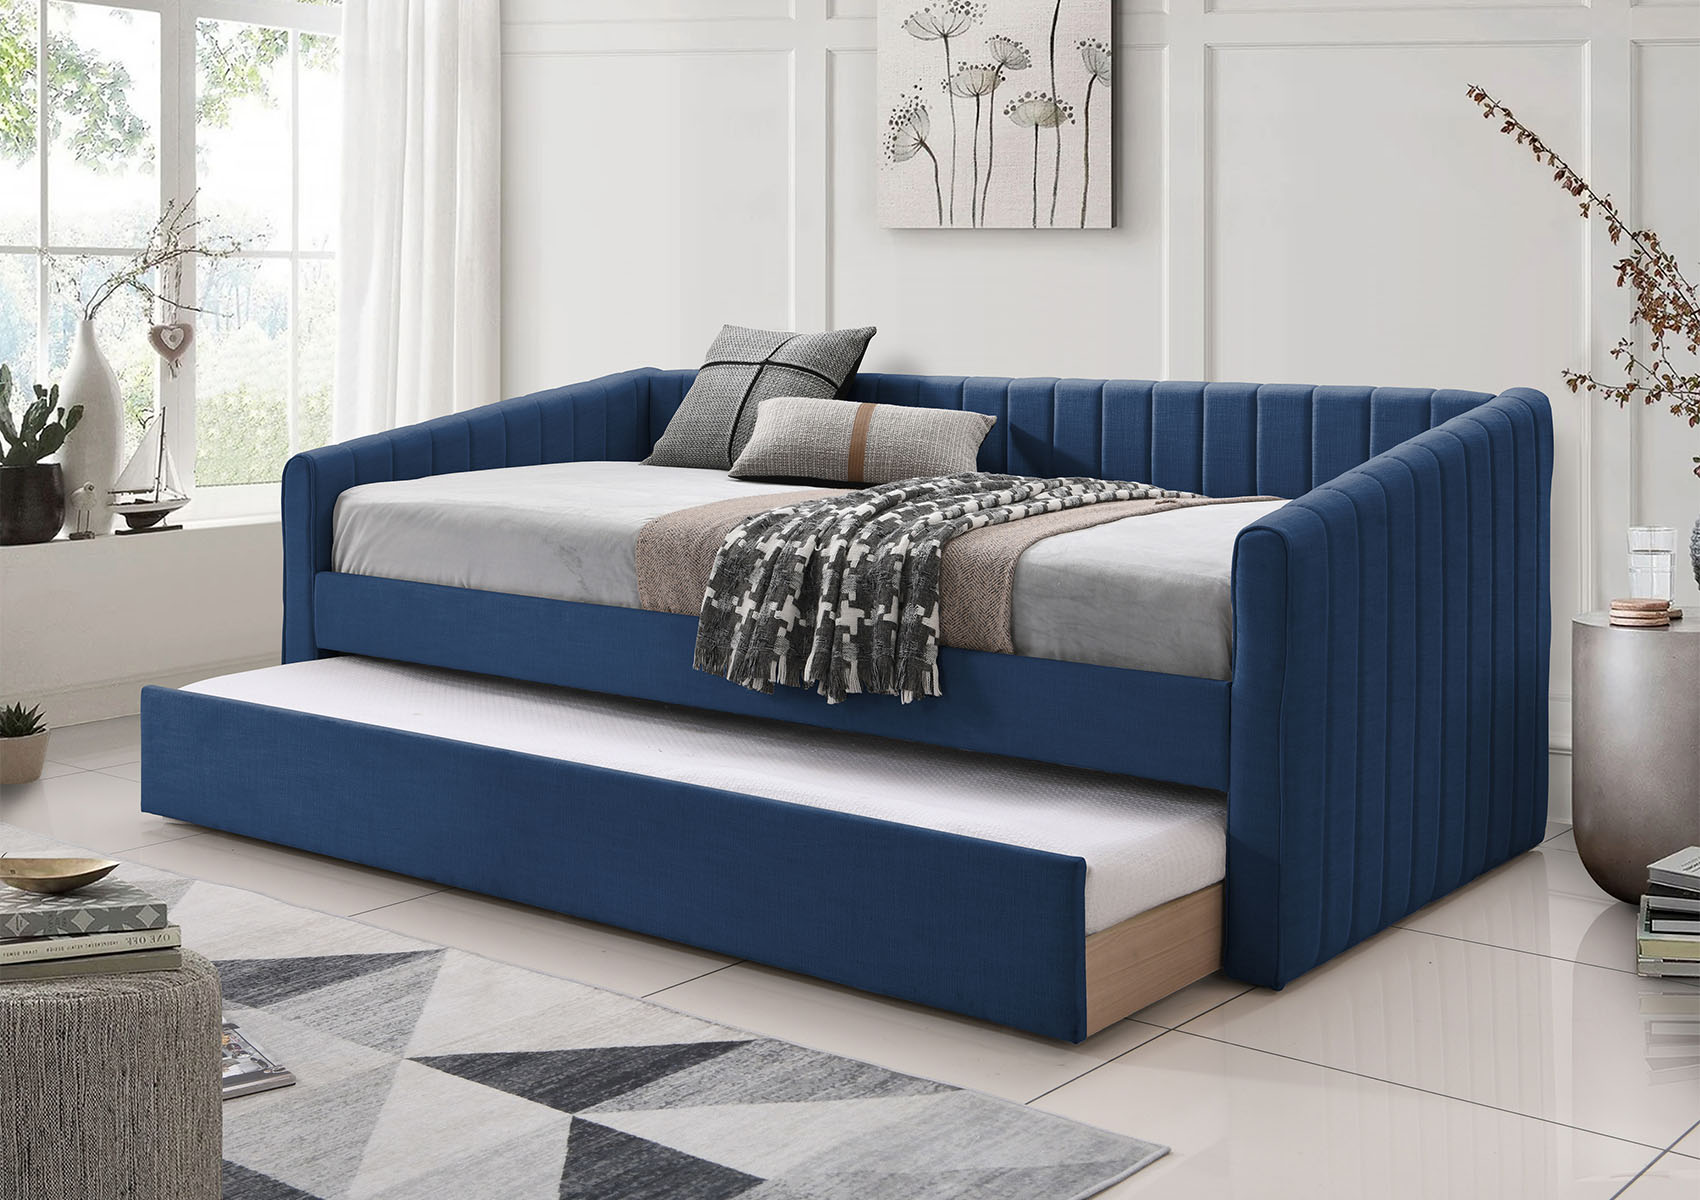 View Sanderson Navy Blue Upholstered Day Bed Including Underbed Time4Sleep information